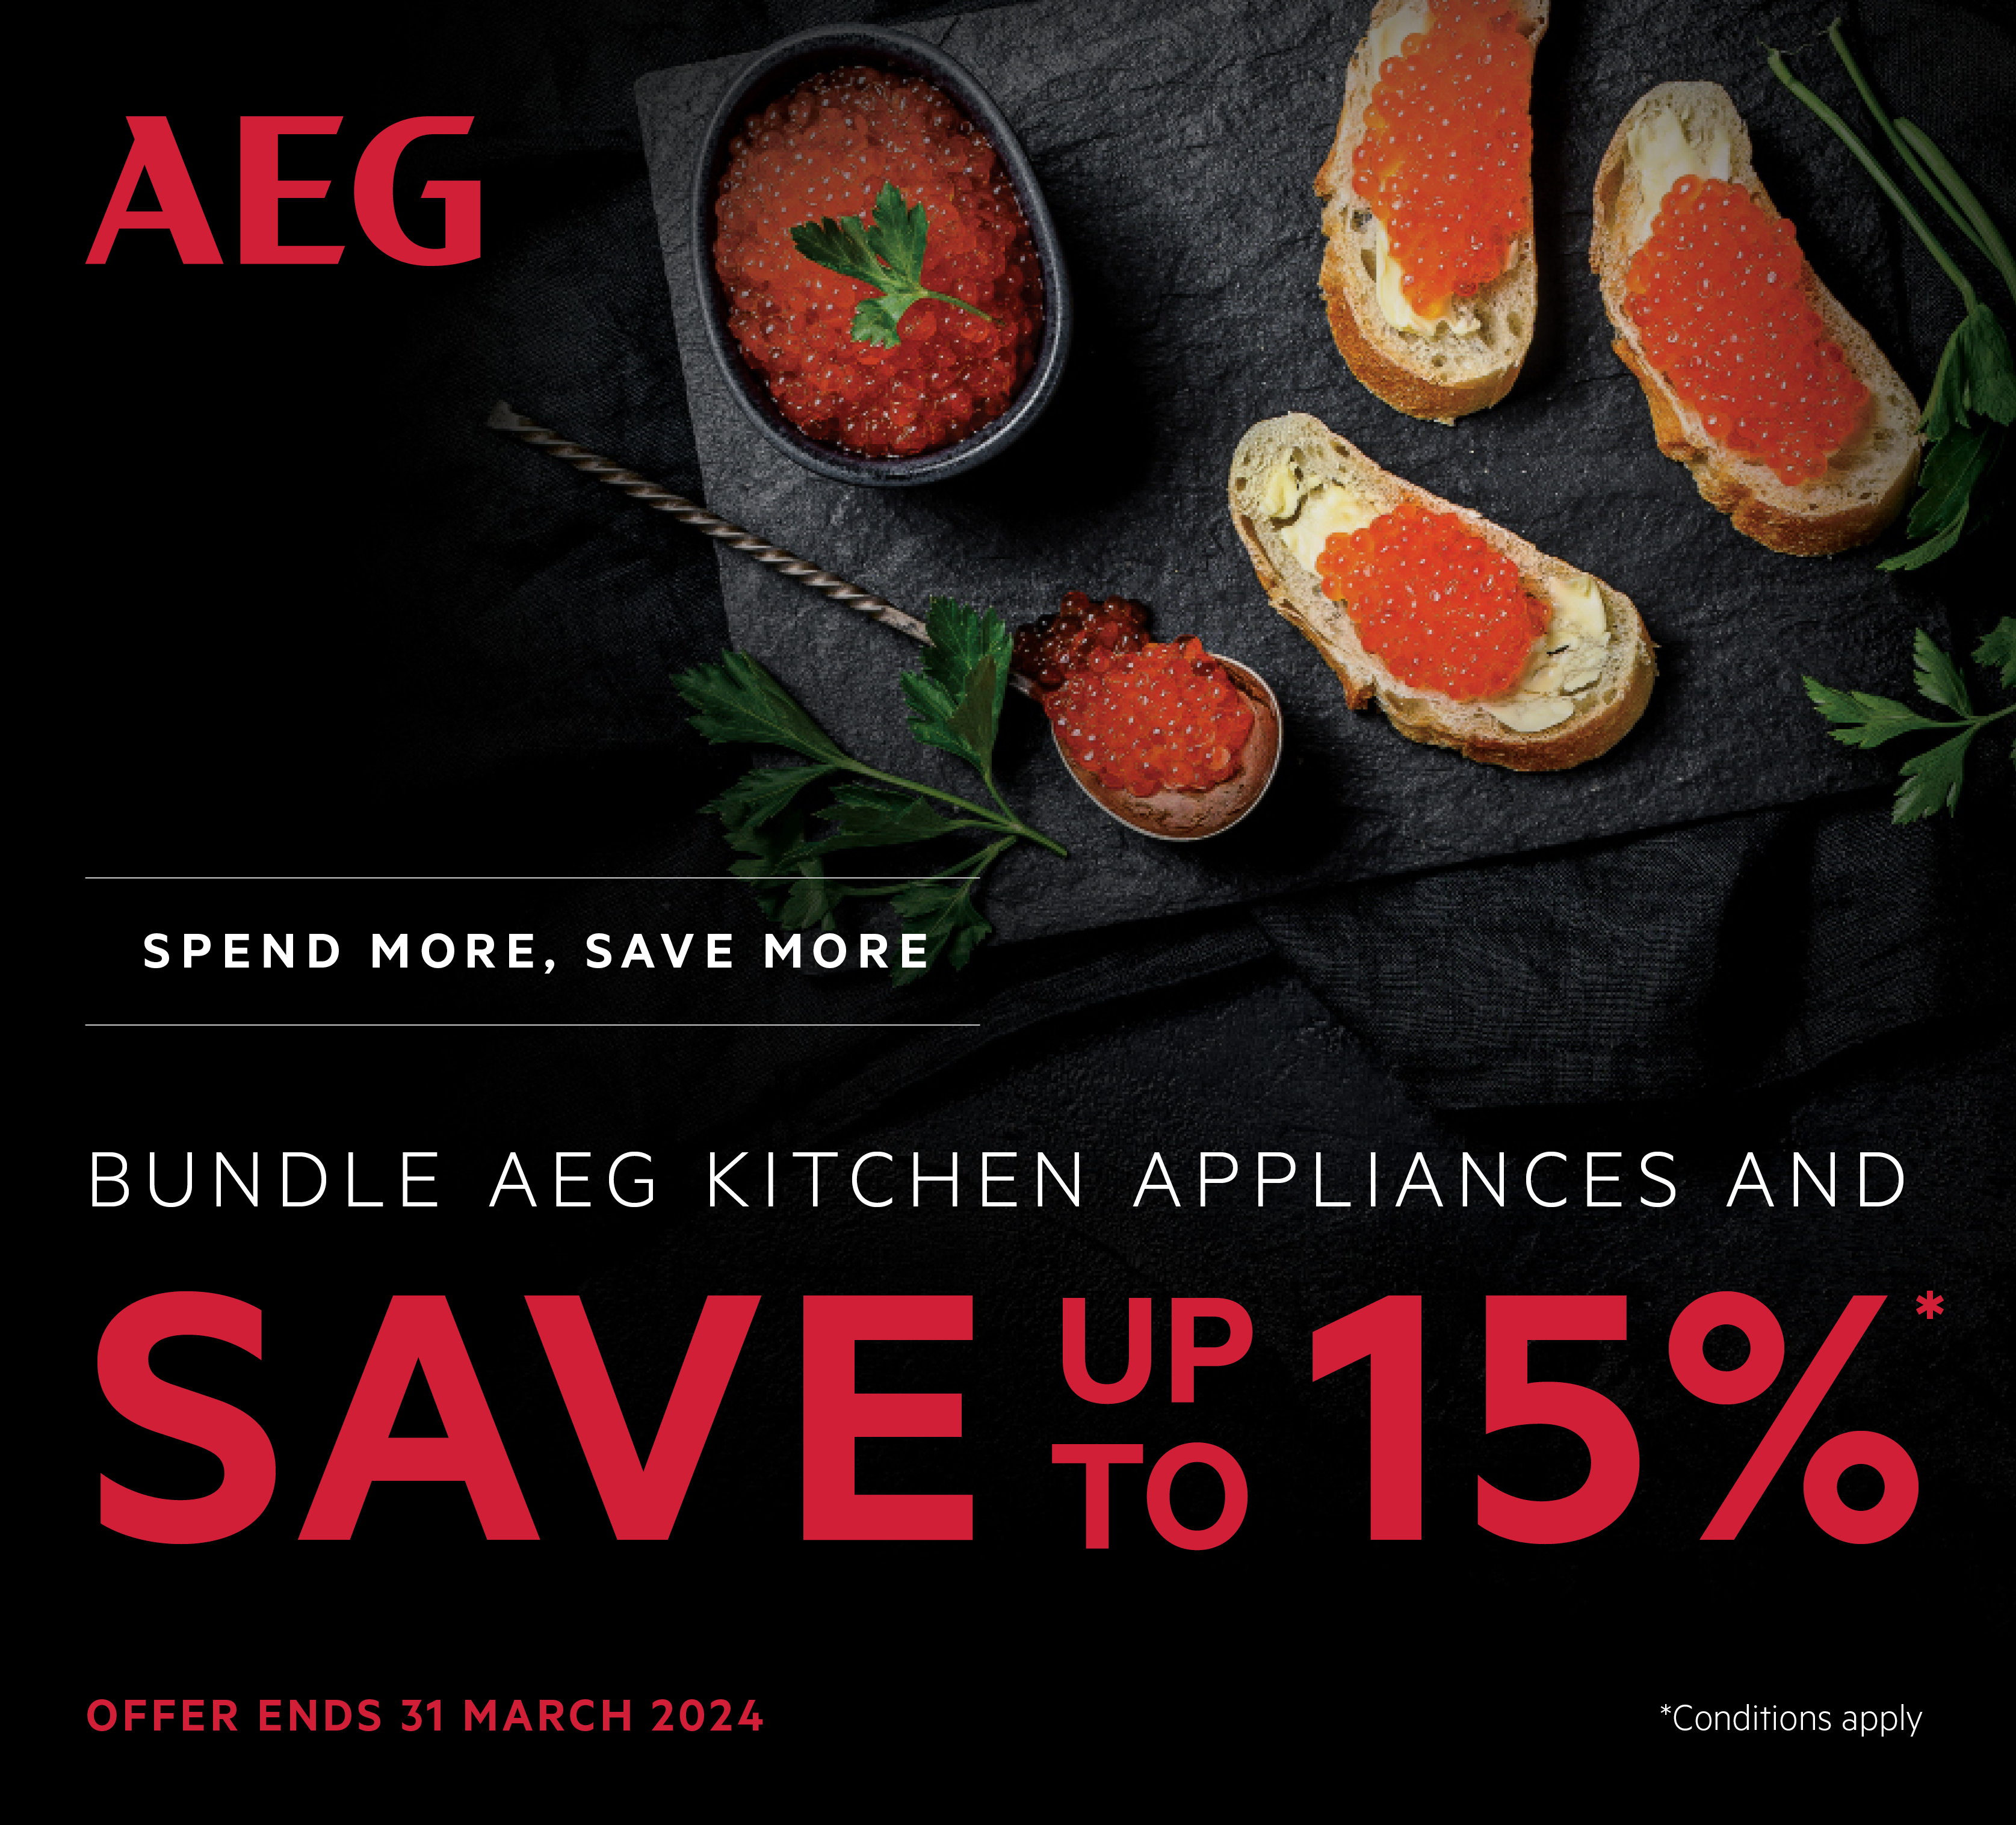 Bundle AEG Kitchen Appliances And Save Up To 15%*